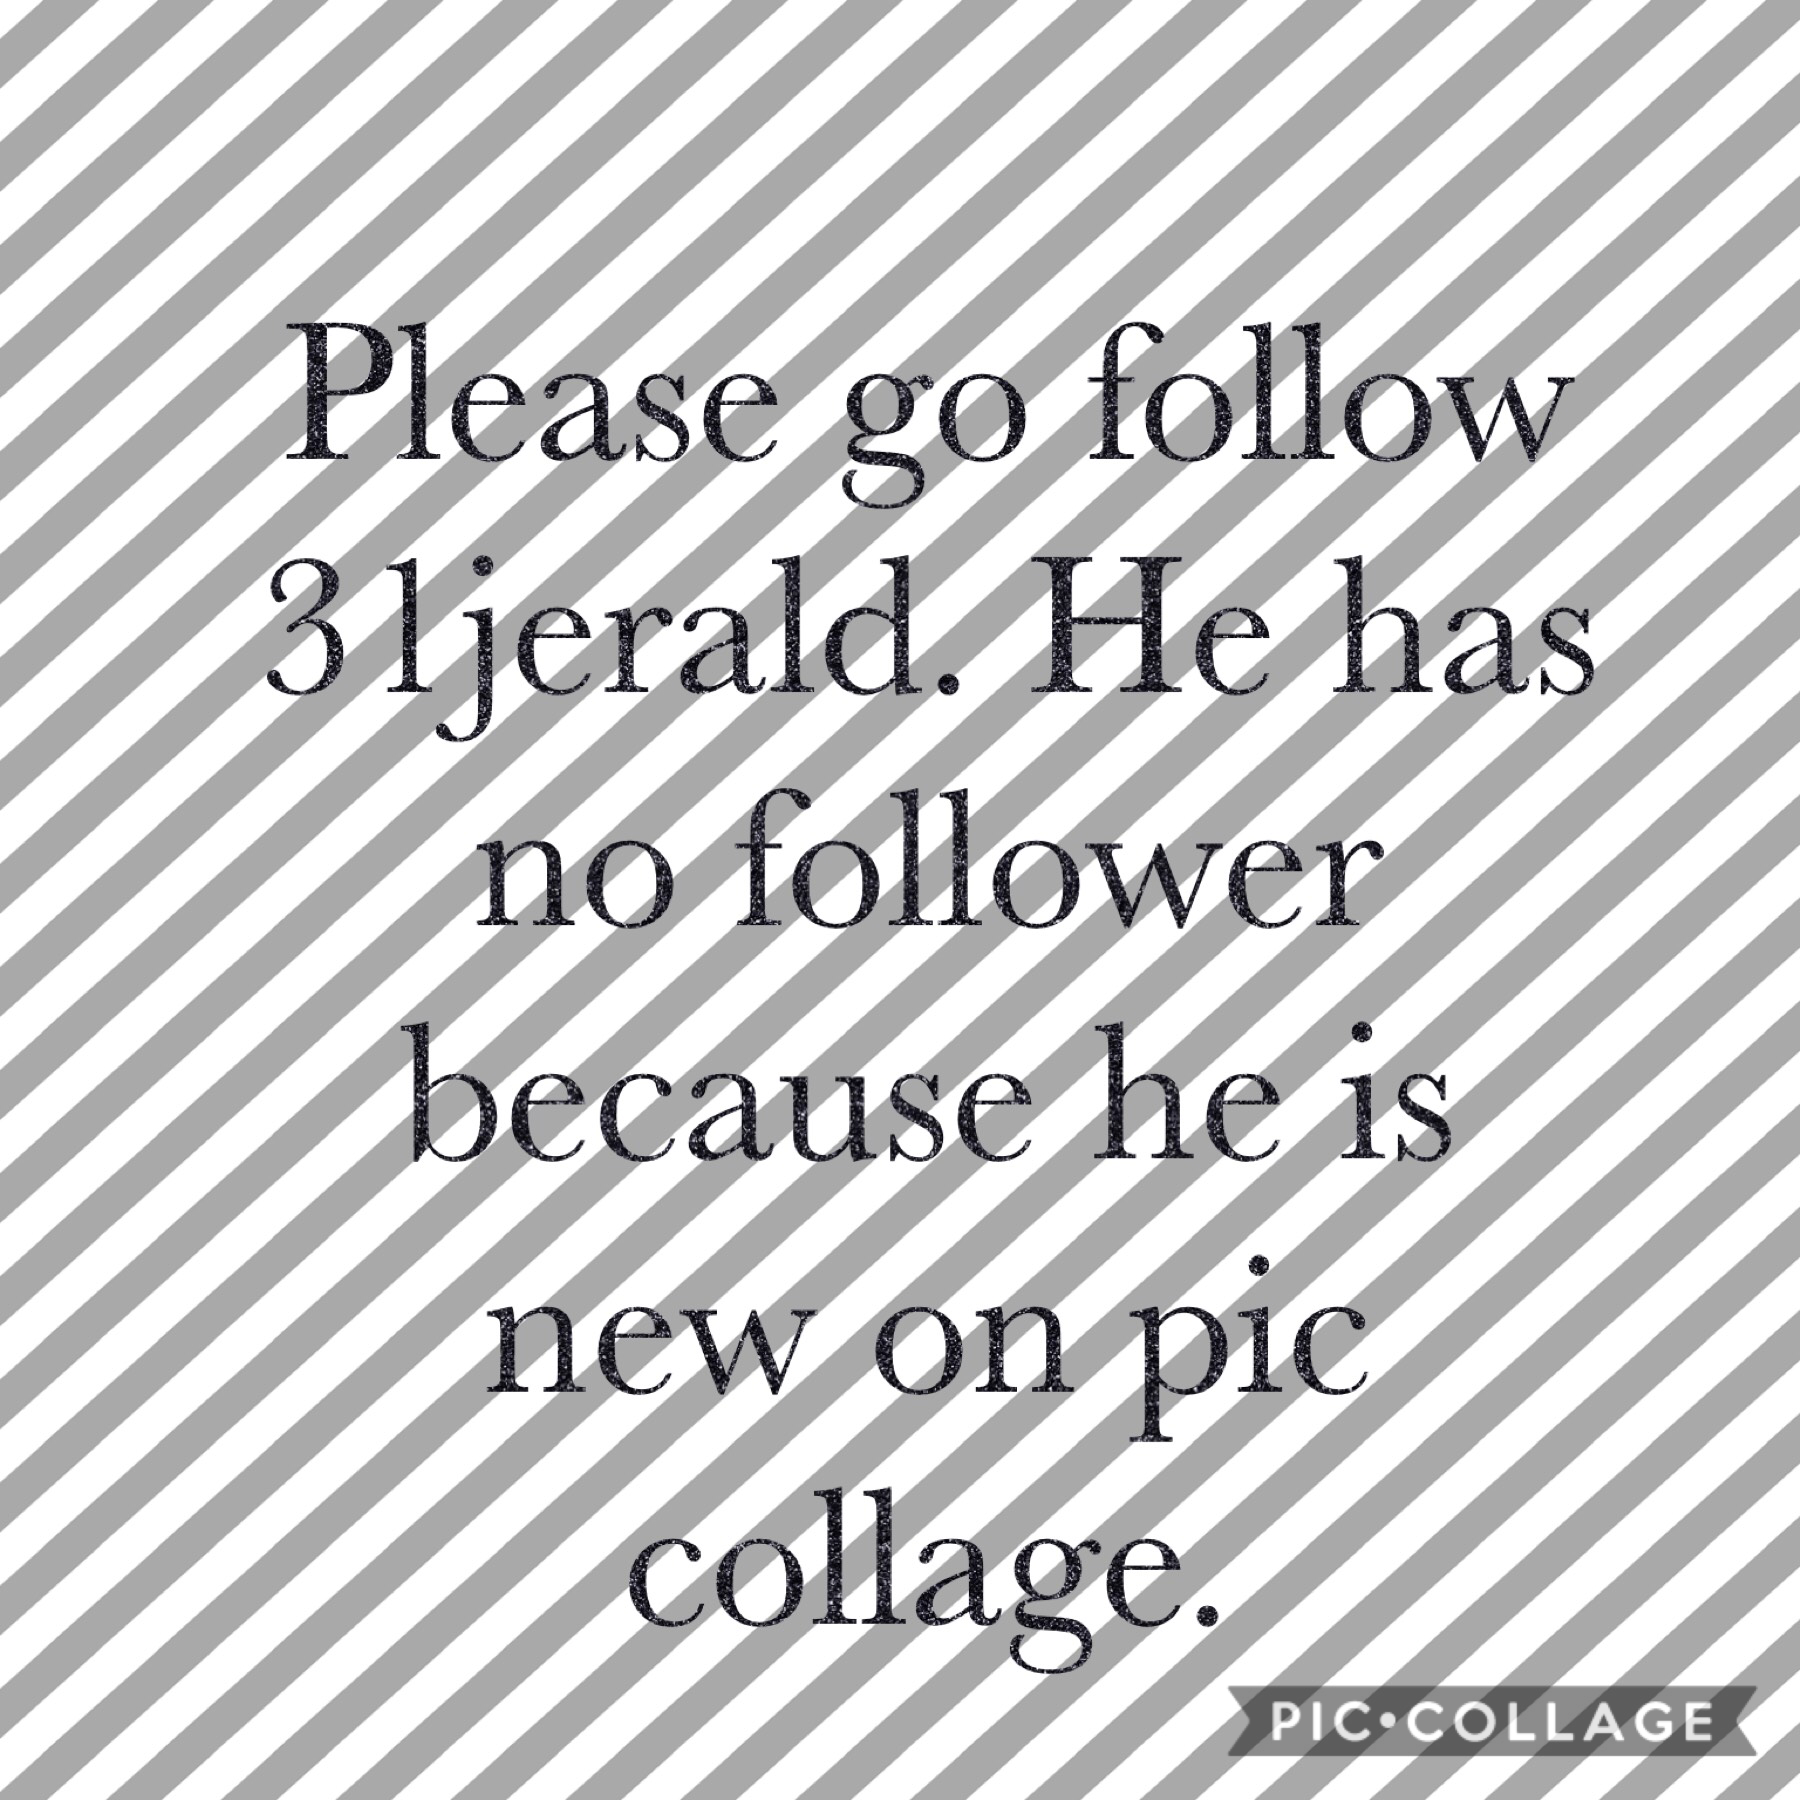 Please go follow my brother he is new on pic collage. Go follow 31jerald.